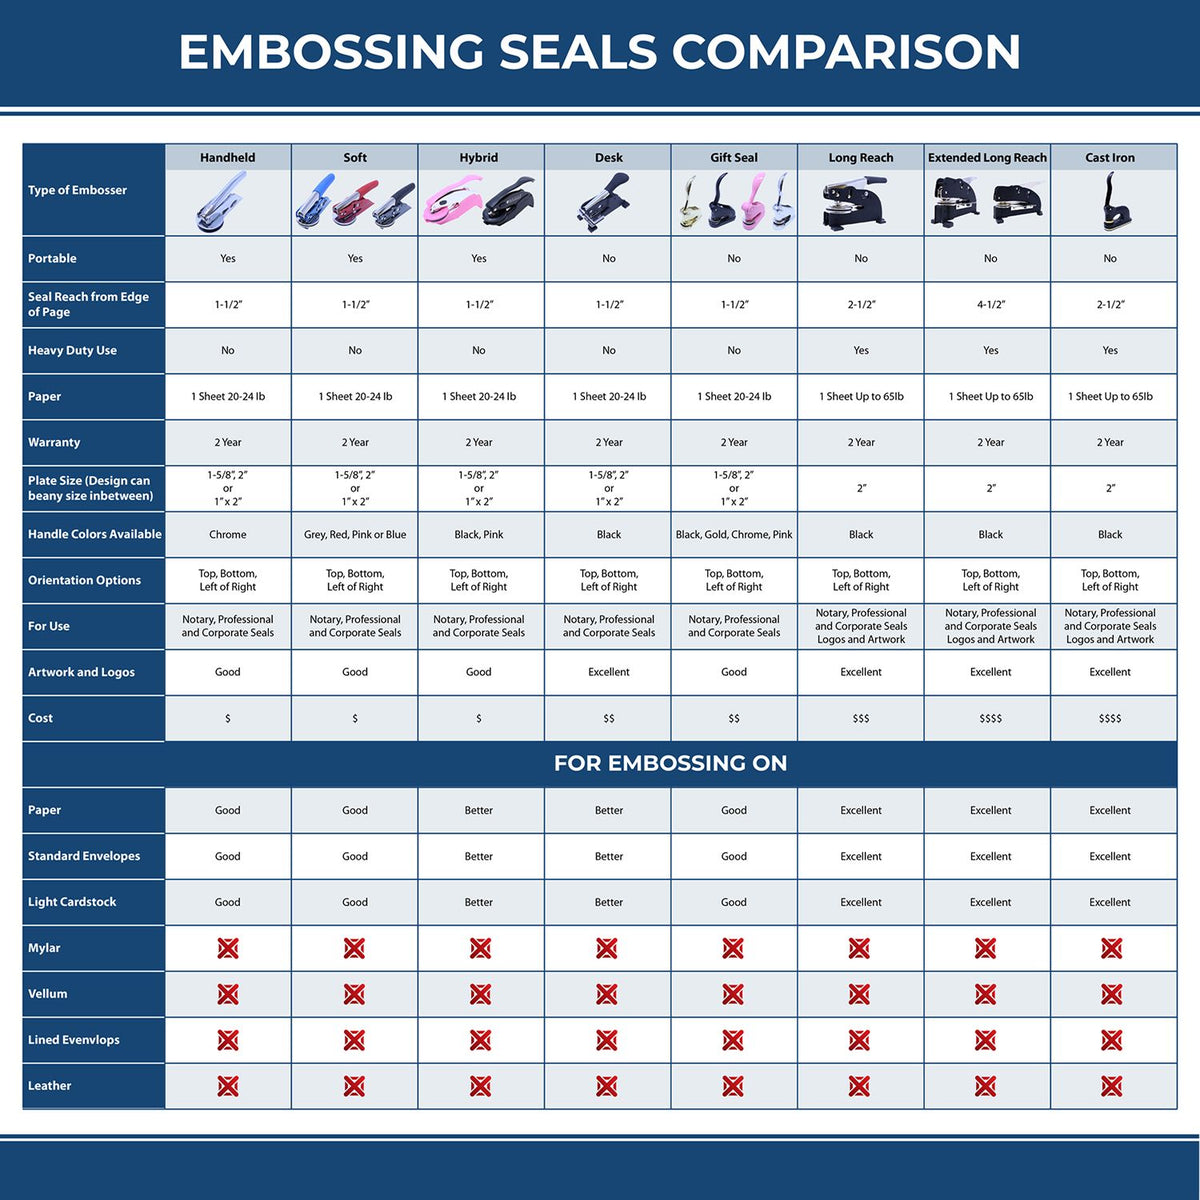 A comparison chart for the different types of mount models available for the Heavy Duty Cast Iron Oklahoma Geologist Seal Embosser